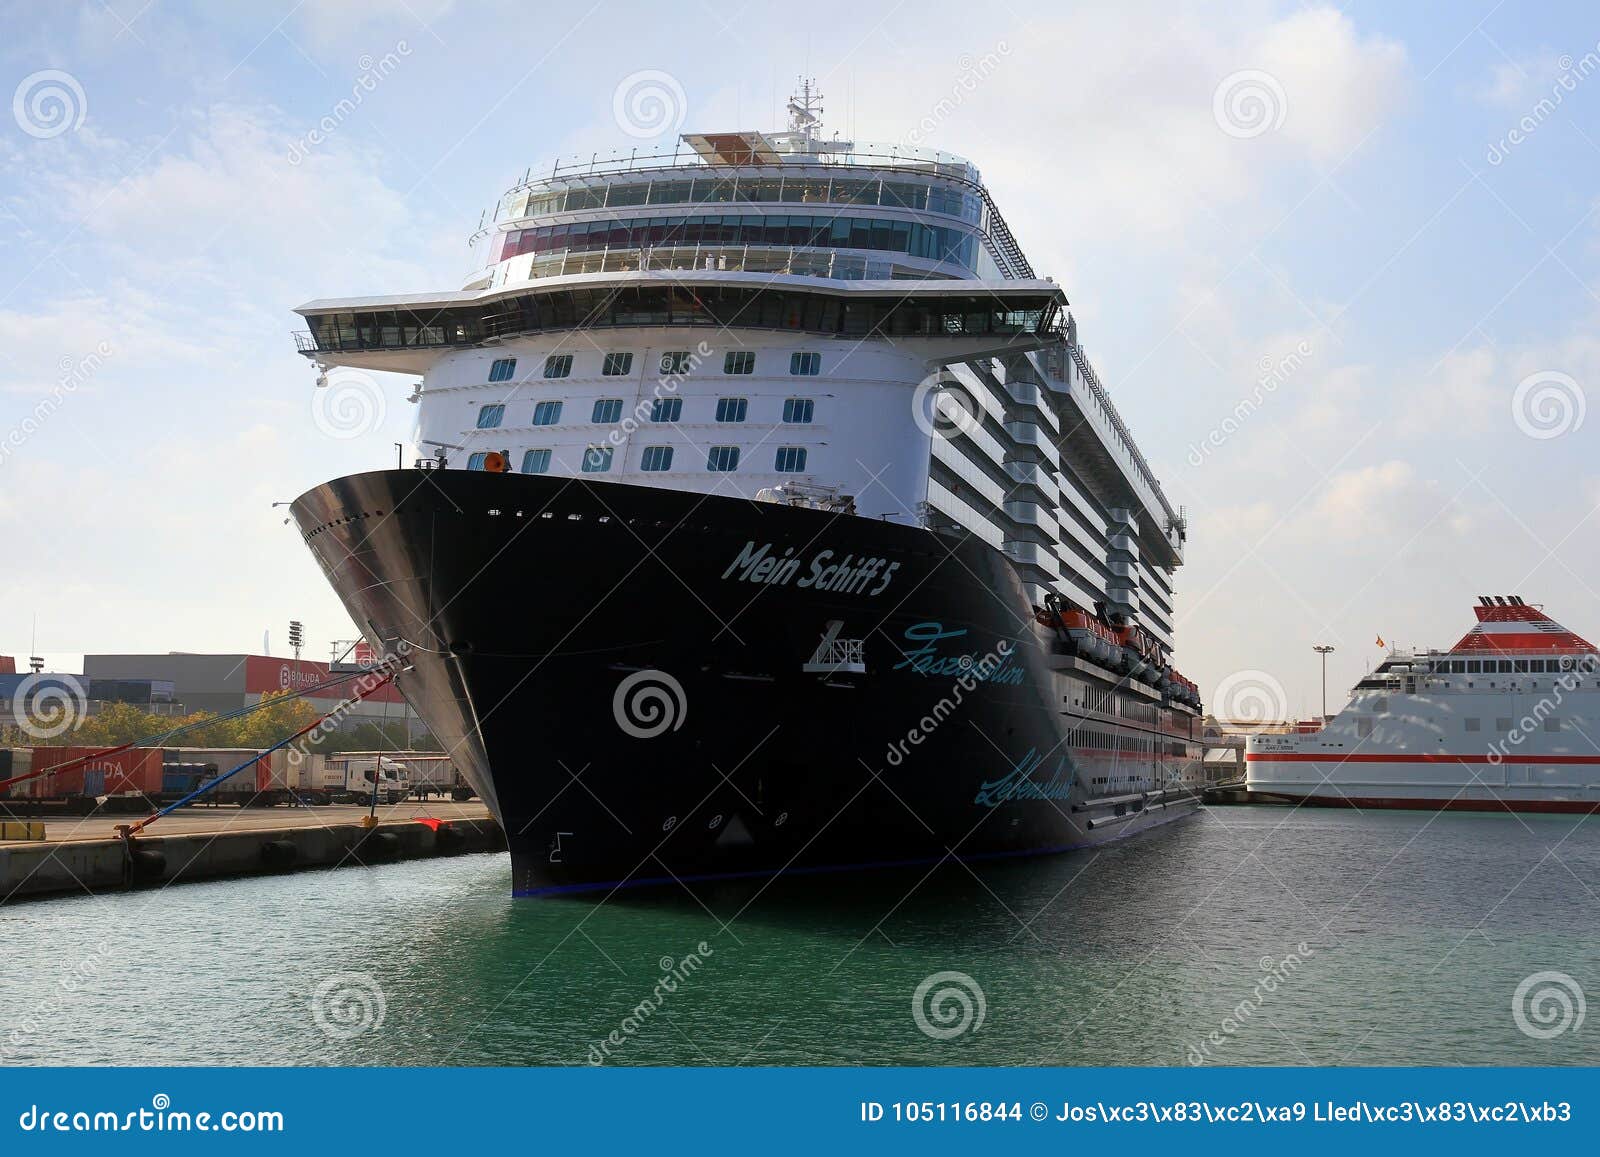 Great Cruise Mein Schiff 5 Docked Editorial Stock Image - Image of